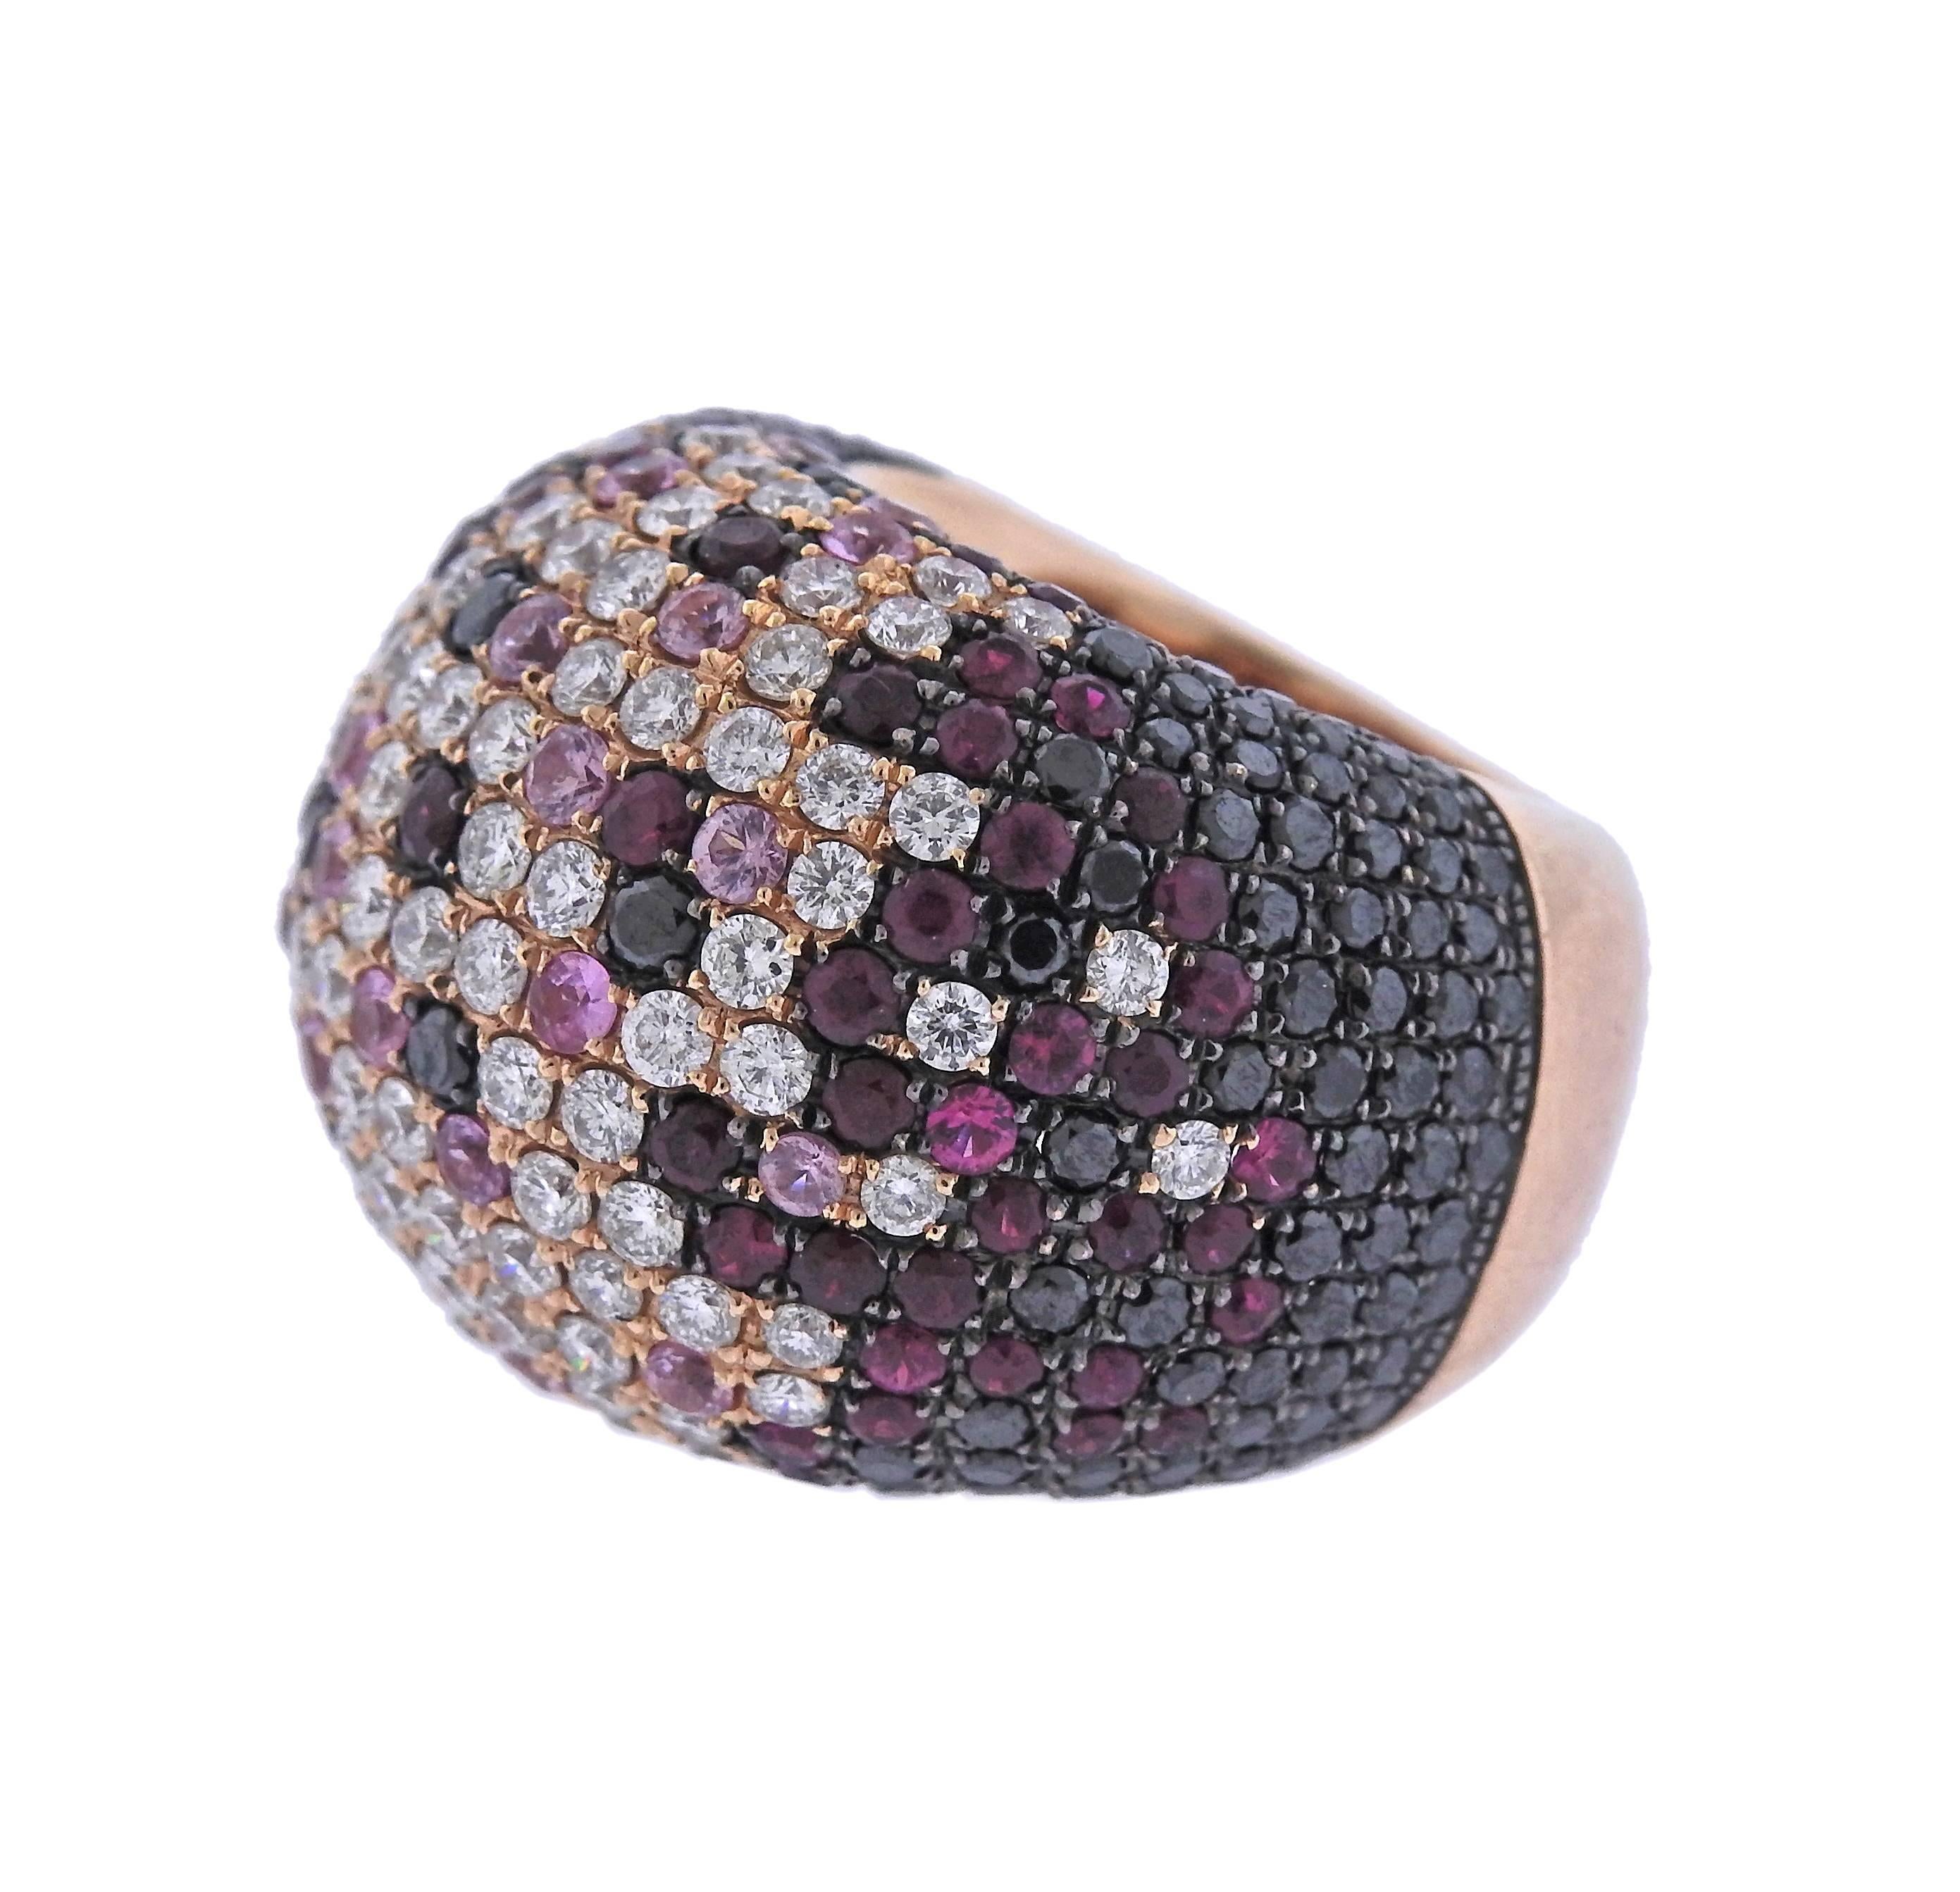 Modern large 18k rose gold ring, crafted with approx. 3.00ctw in white and black diamonds, pink sapphires and rubies.  Ring size 6, ring top is 21mm wide and weighs 21.7 grams. Marked: 750, LTJ. 